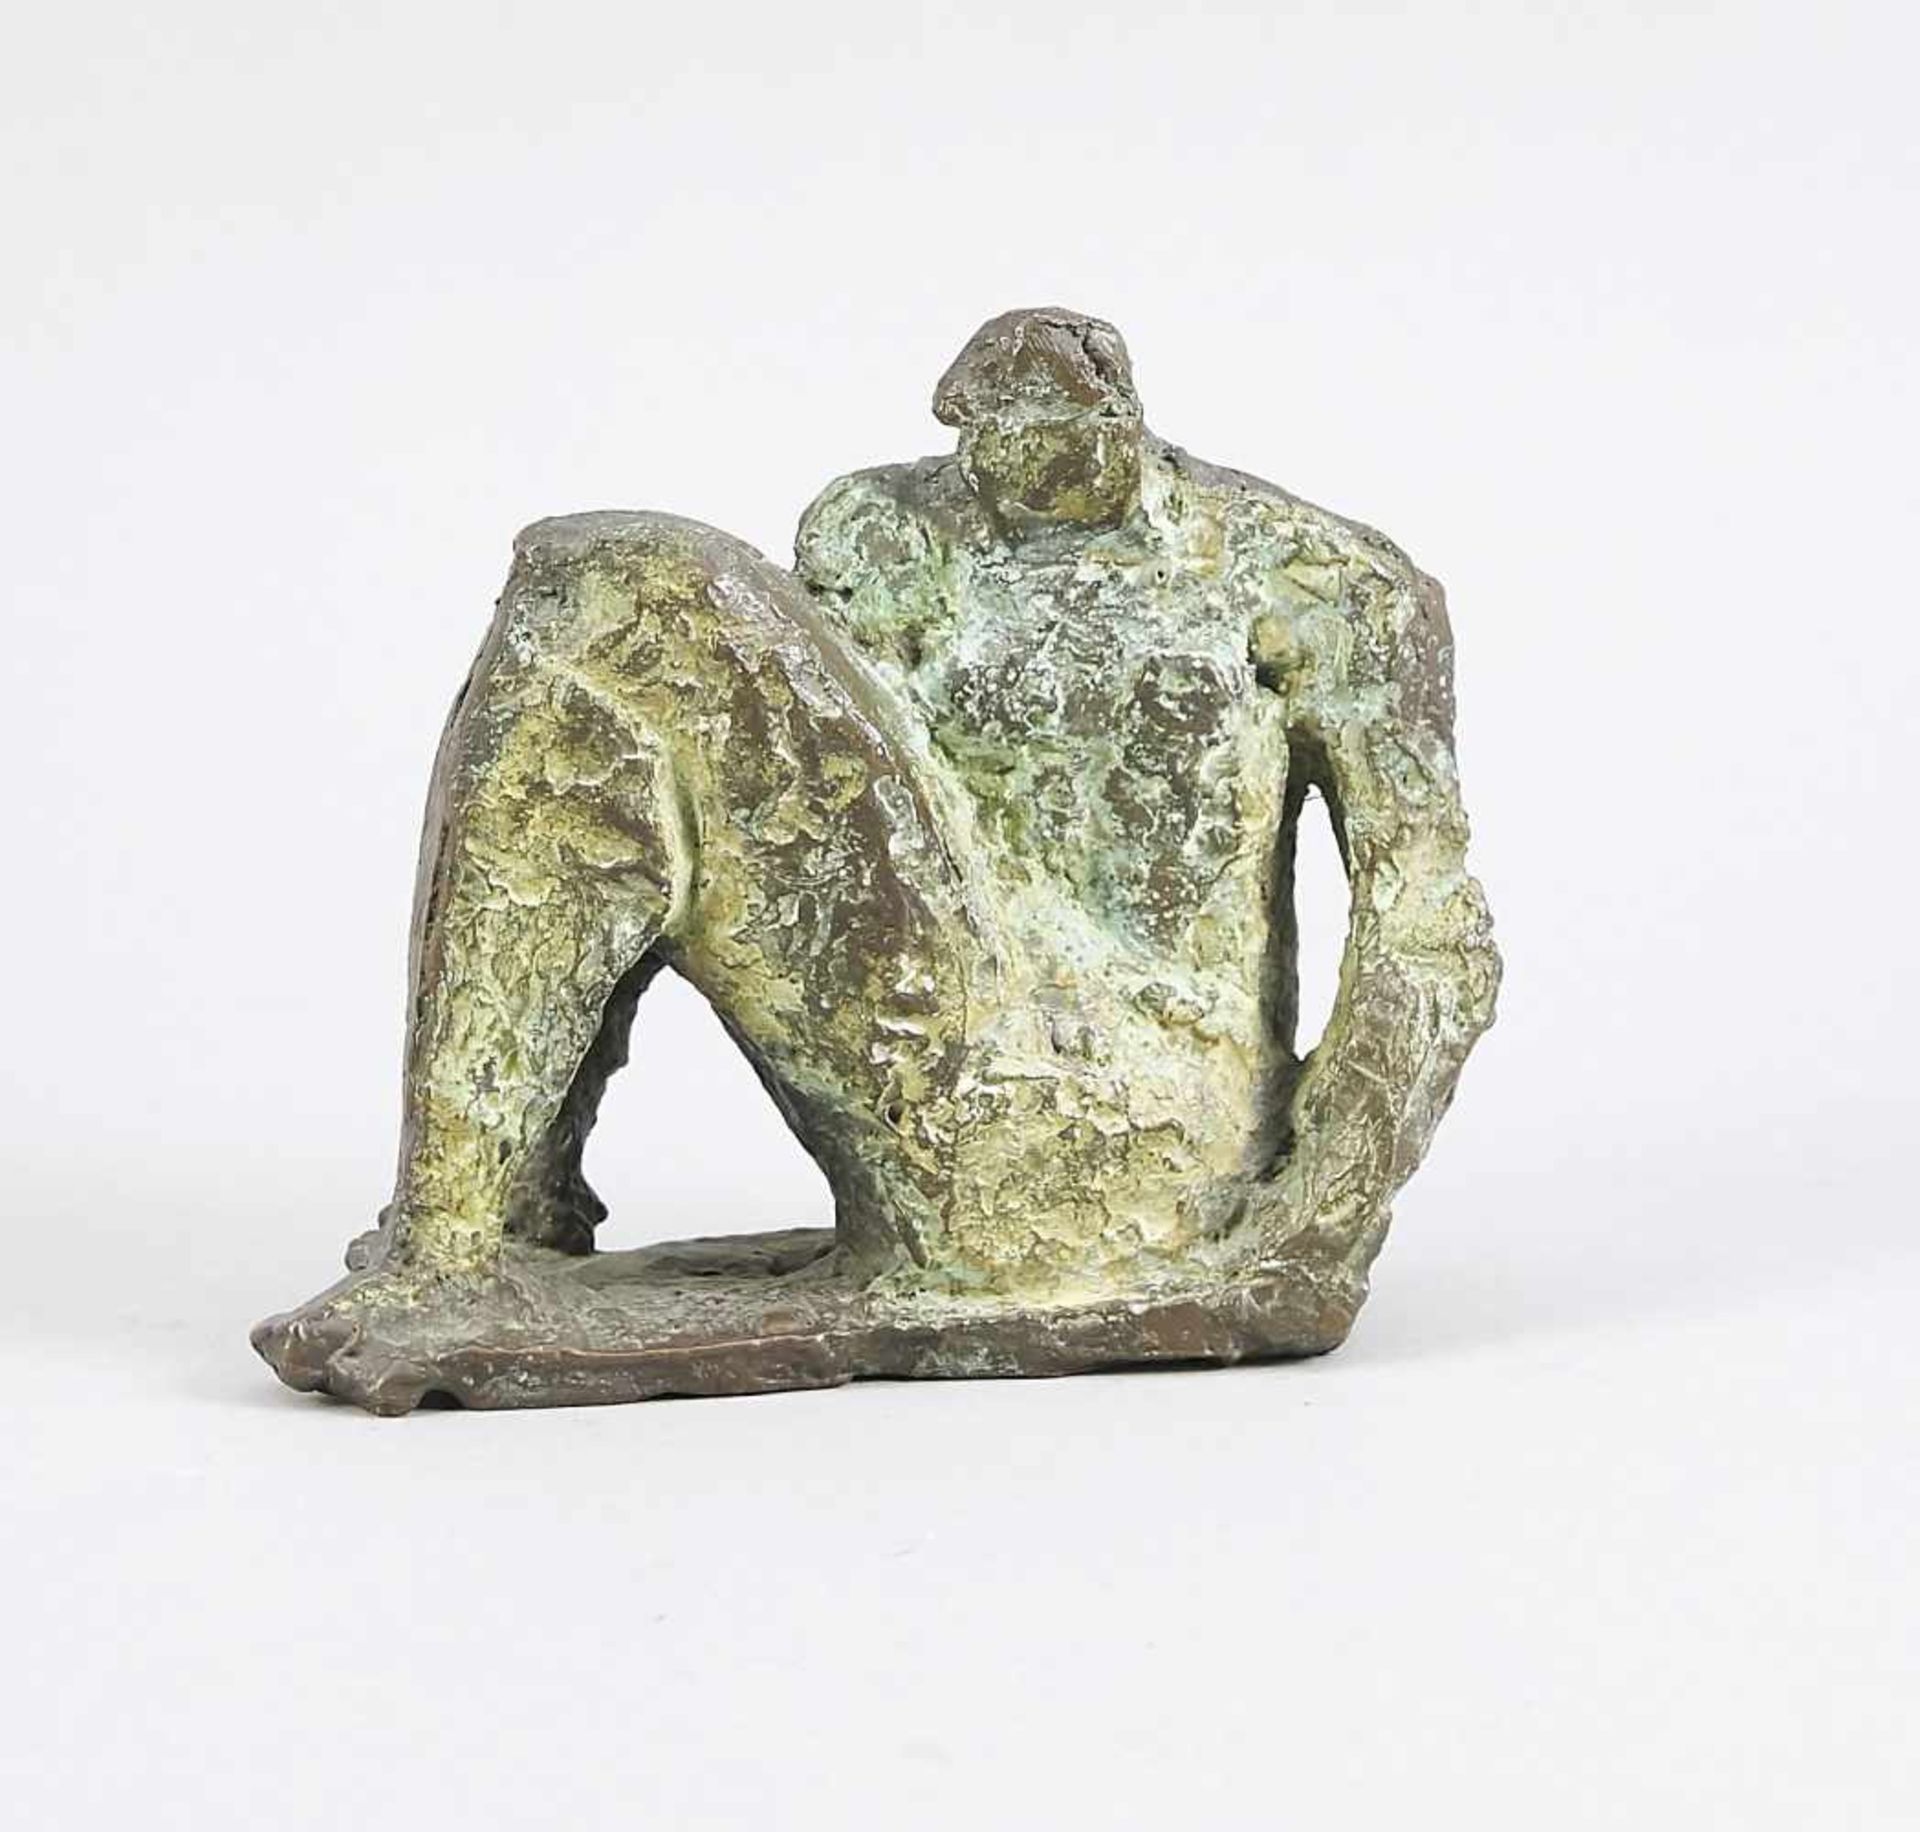 Unidentified sculptor d. 20th century, seated figure, patinated bronze, indistinctly